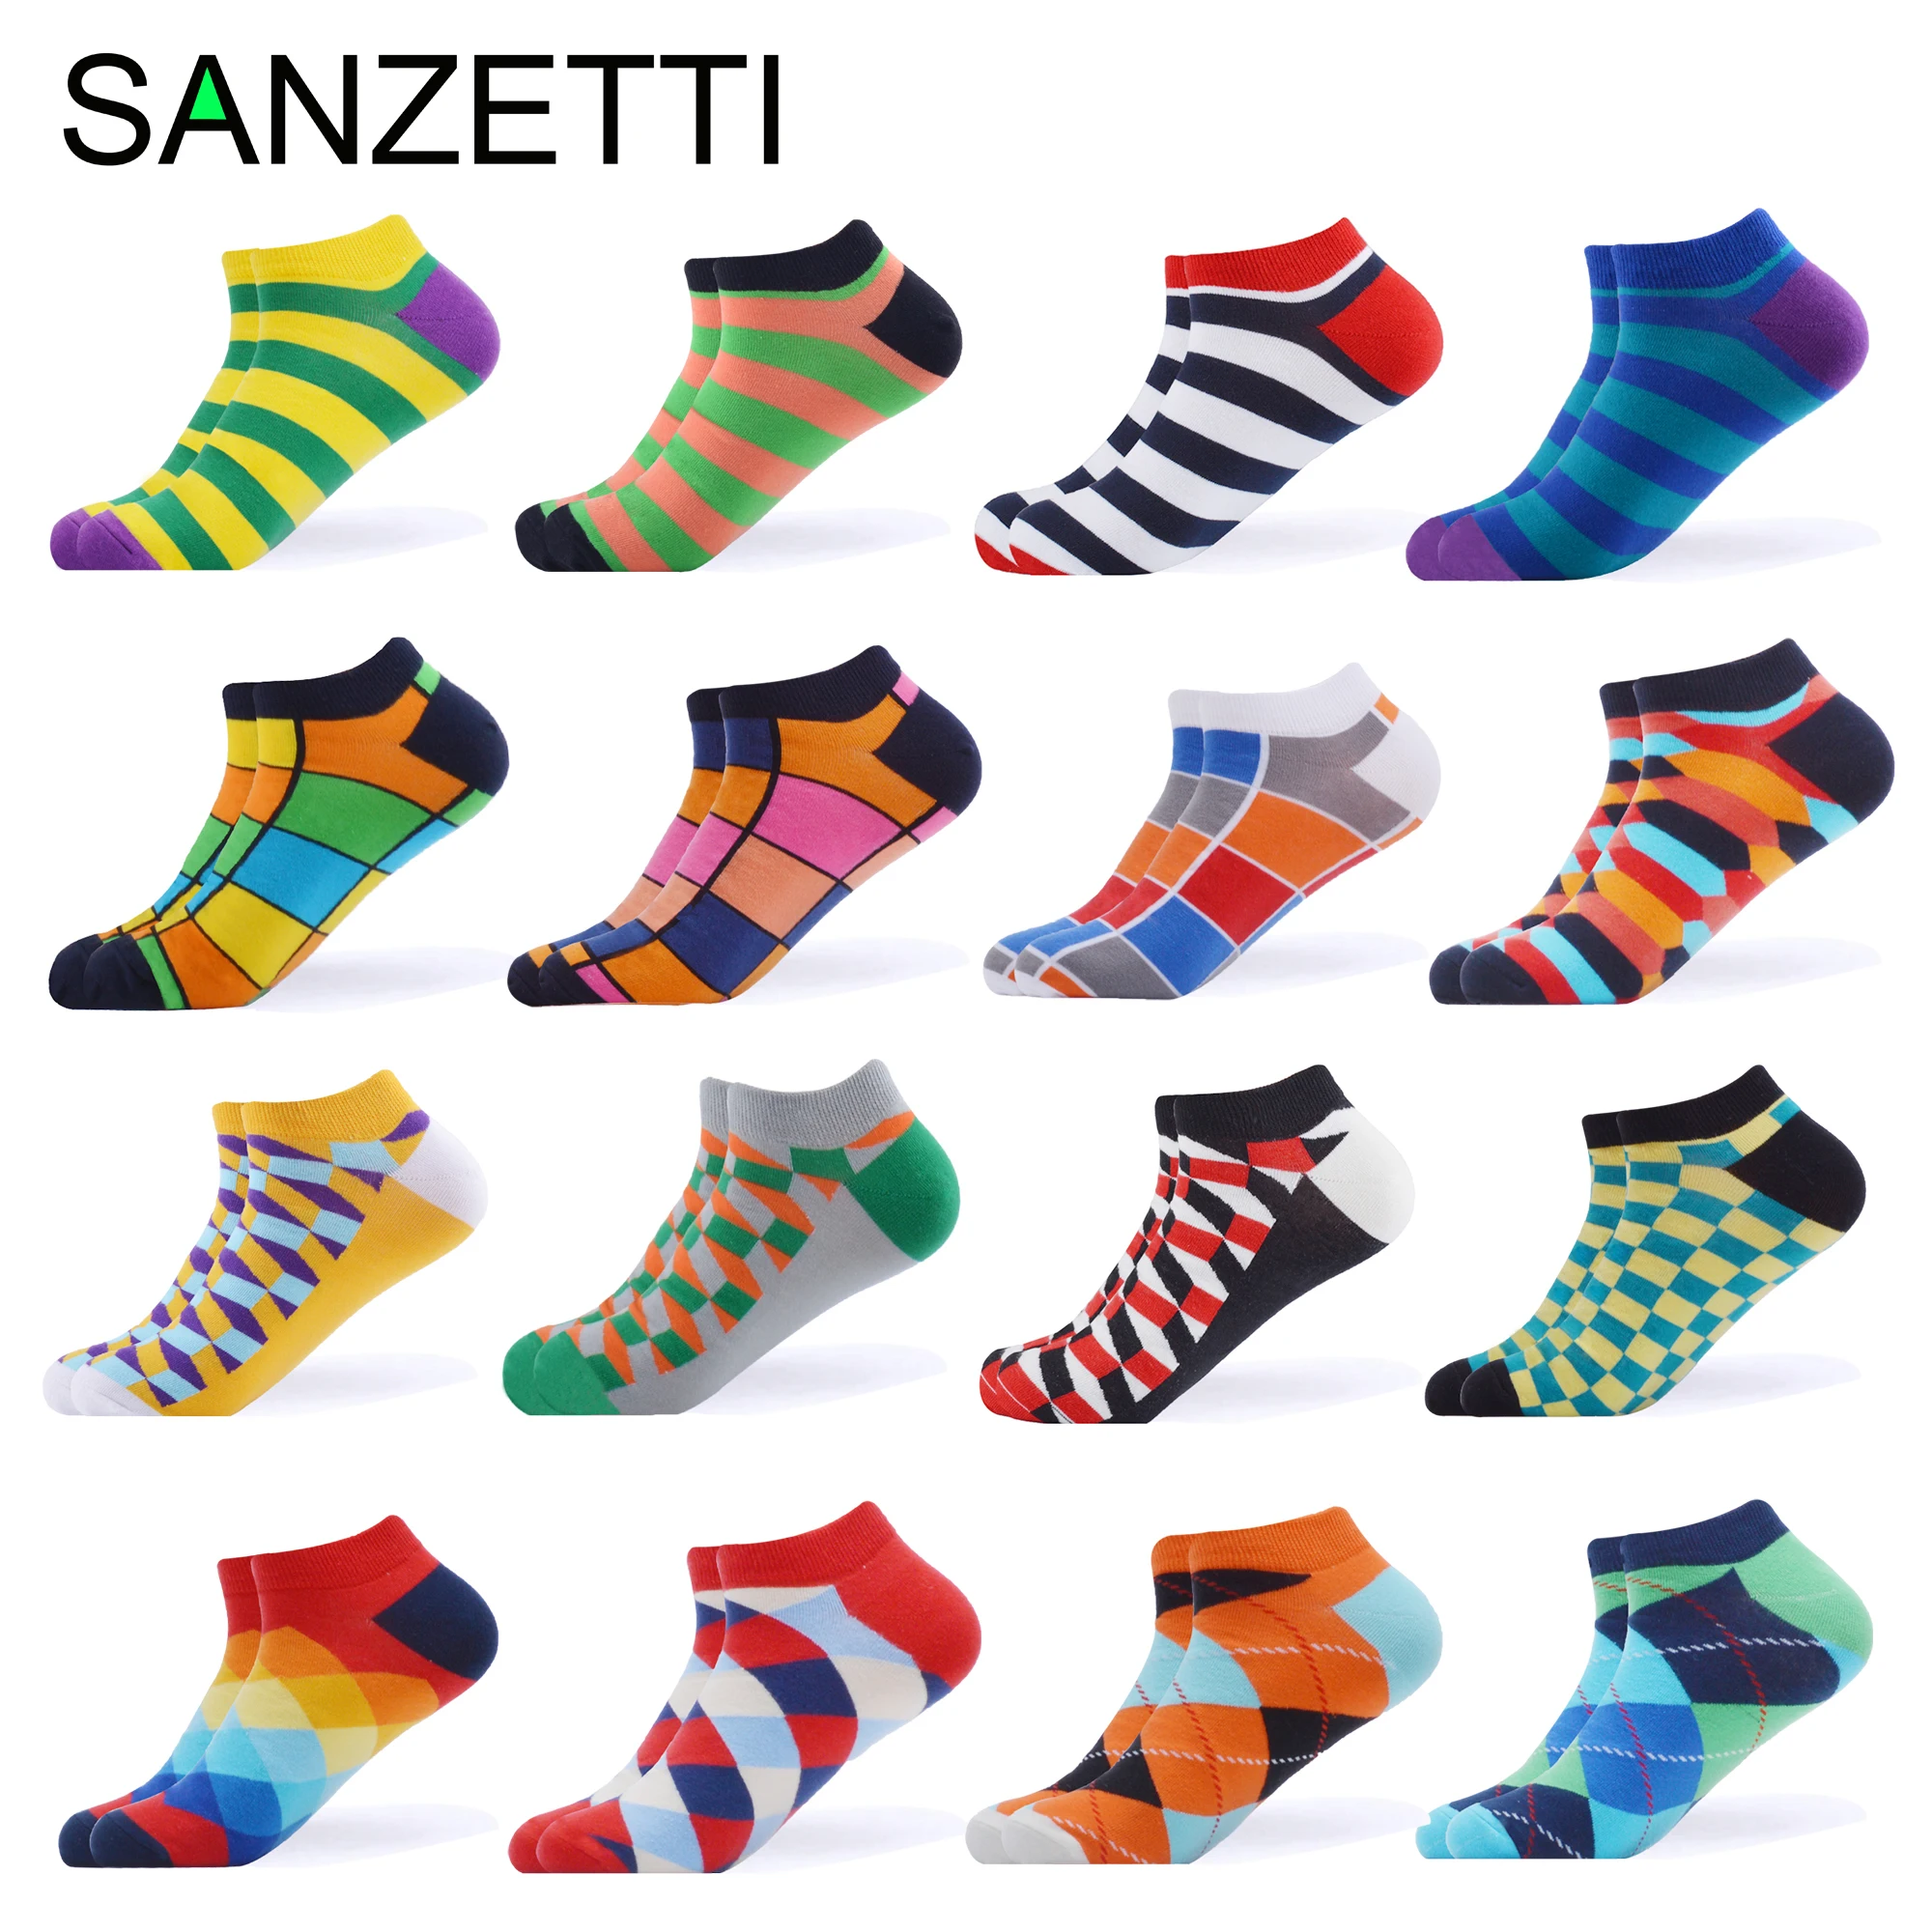 

SANZETTI 16 Pairs/Lot Casual Novelty Men Colorful Summer Combed Cotton Ankle Socks Plaid Striped Geometric Cool Dress Boat Socks